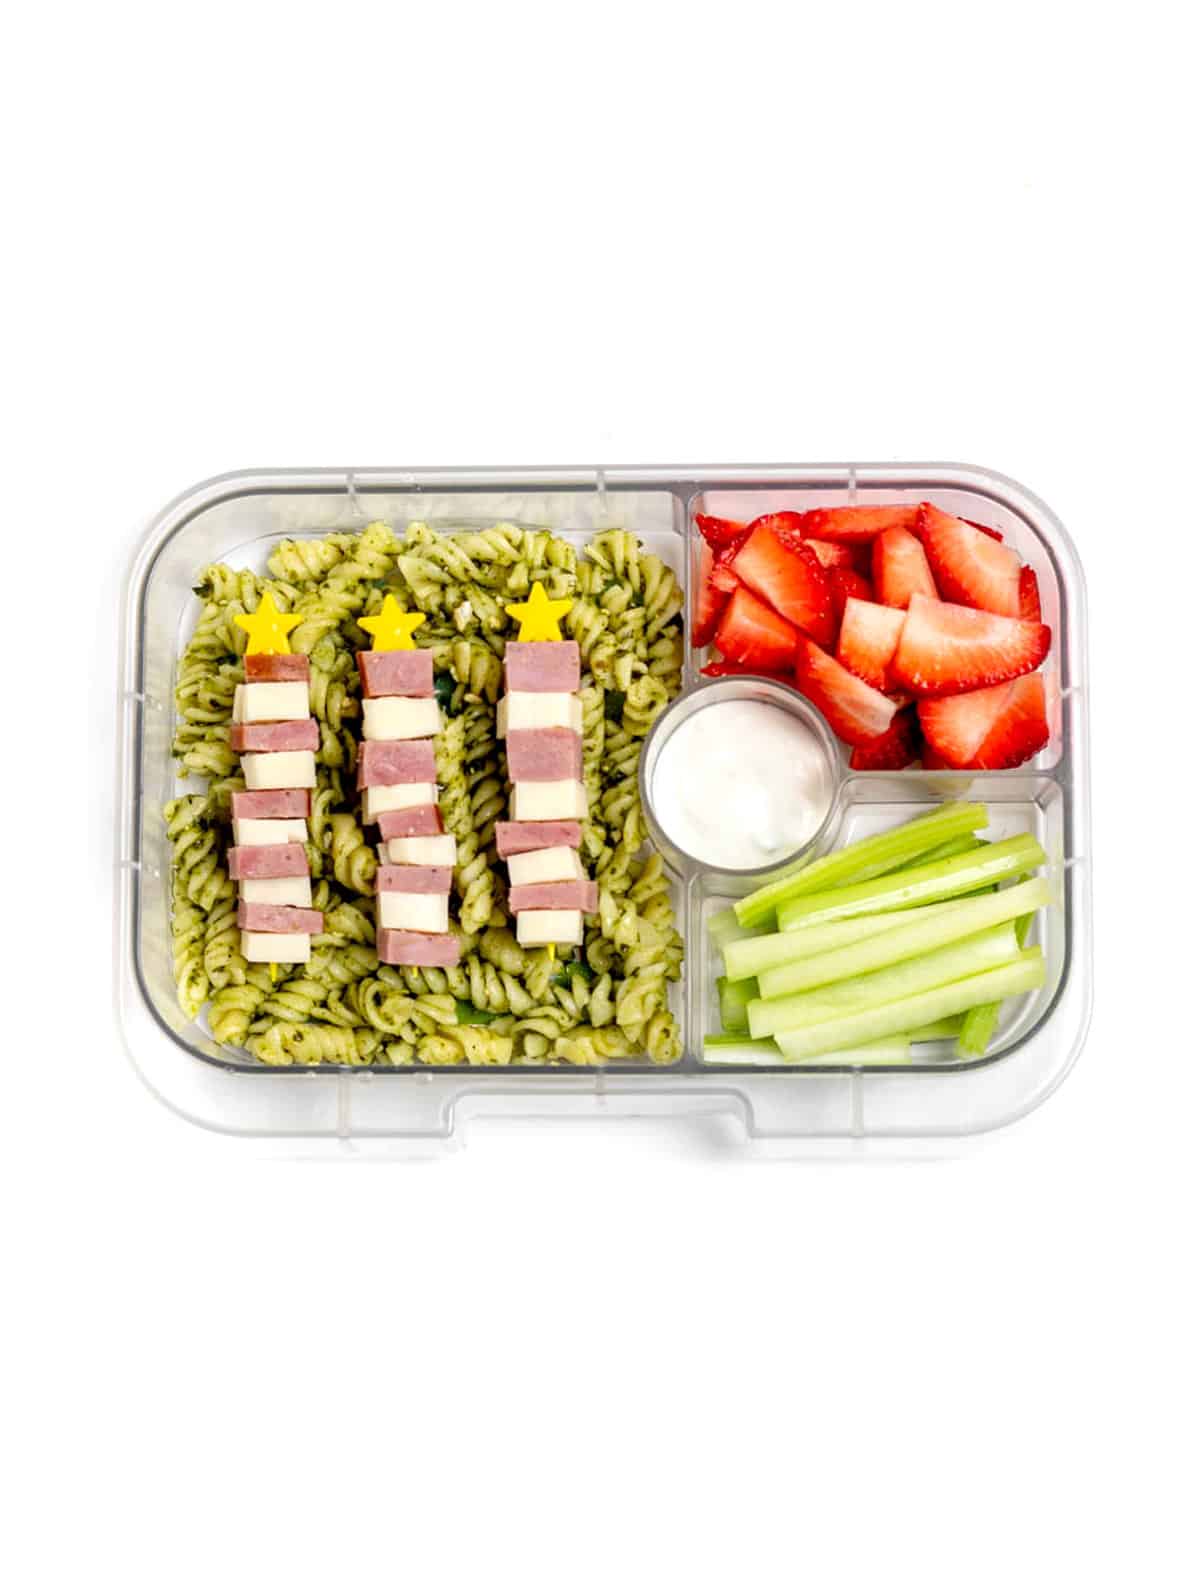 A lunch box with pesto pasta salad, topped with star ham and cheese skewers, strawberries, celery sticks and dip.